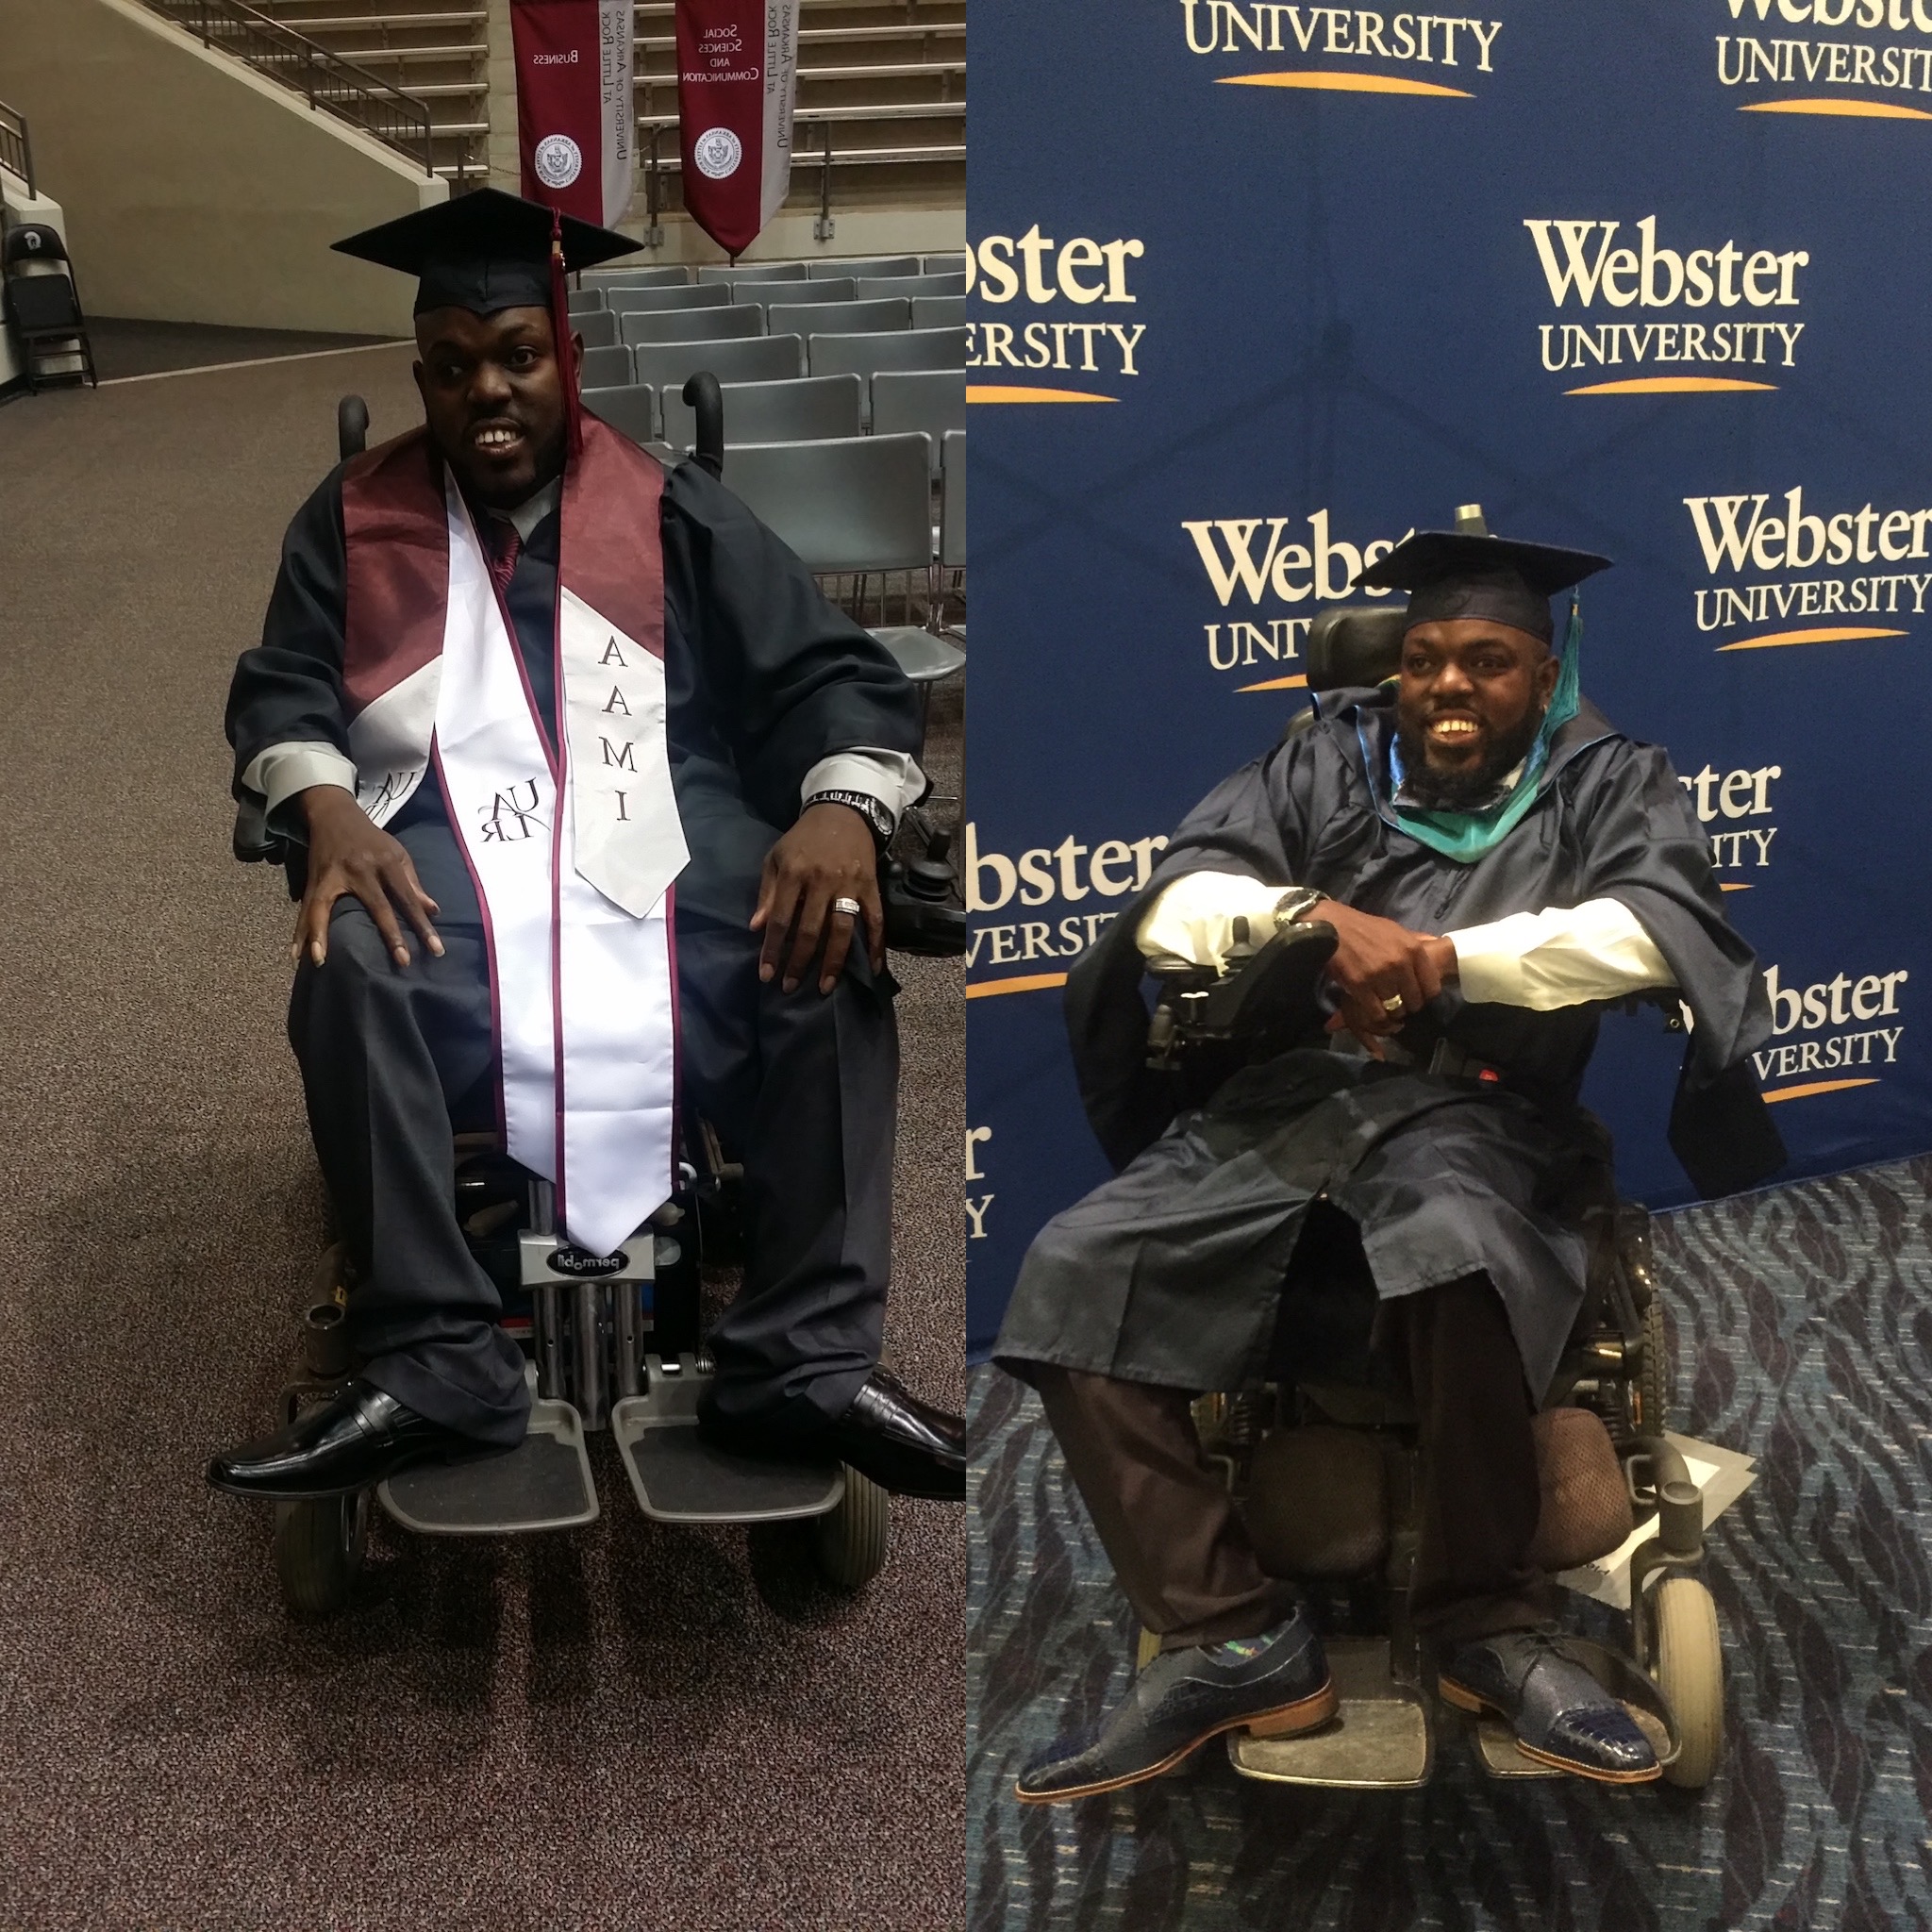 UA Little Rock graduate Freddie Epperson celebrates his graduations from UA Little Rock and Webster University.